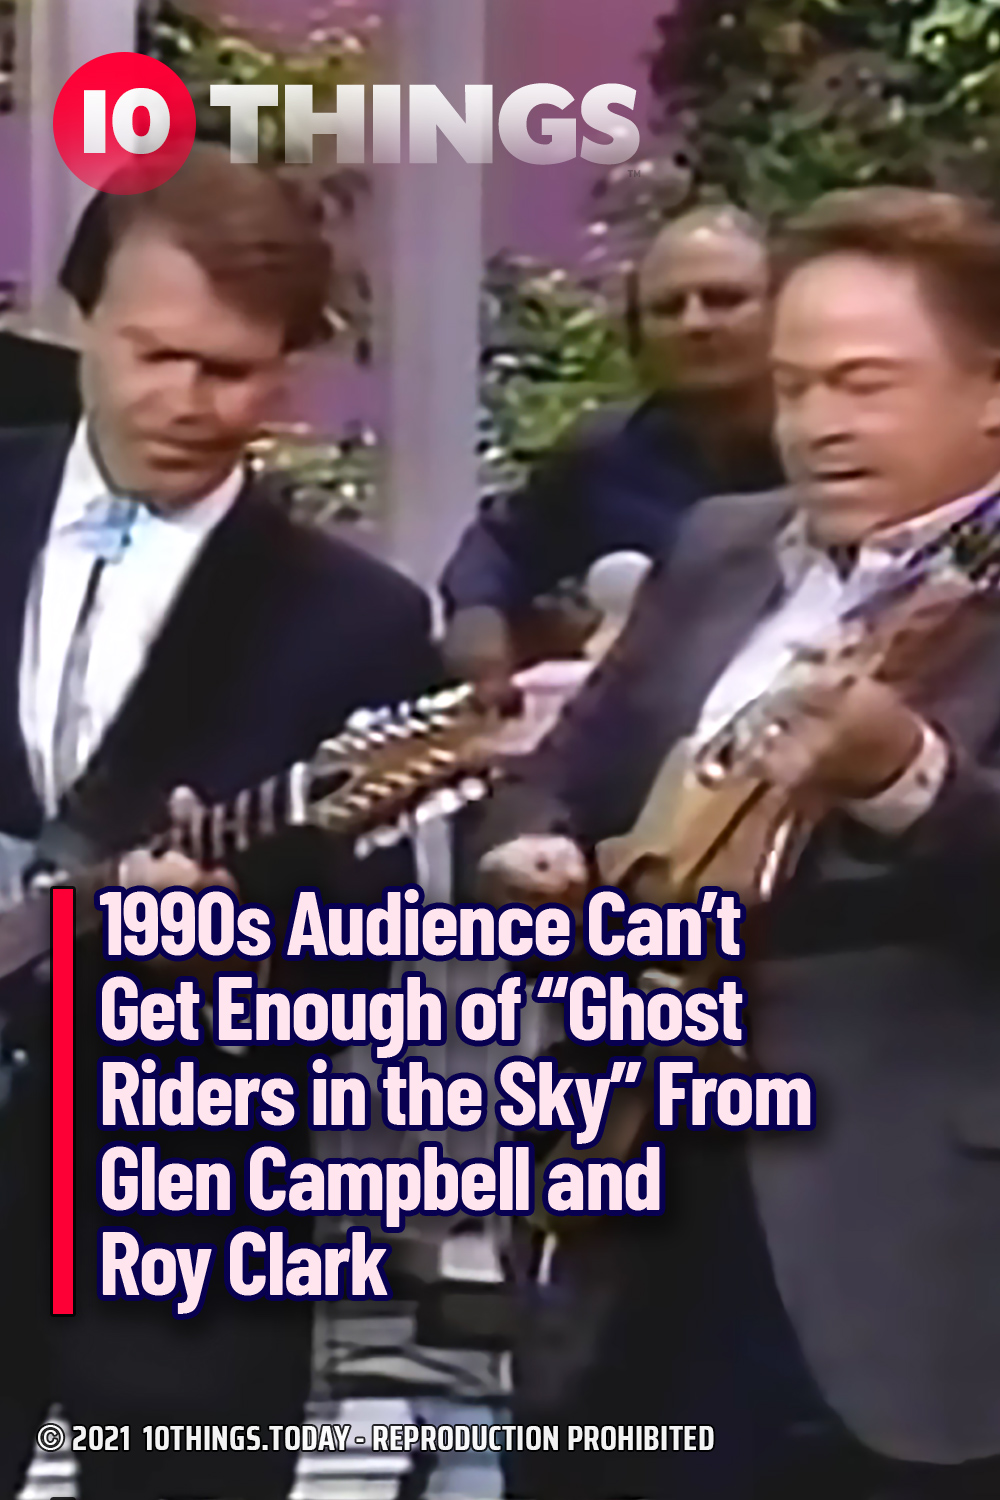 1990s Audience Can’t Get Enough of “Ghost Riders in the Sky” From Glen Campbell and Roy Clark